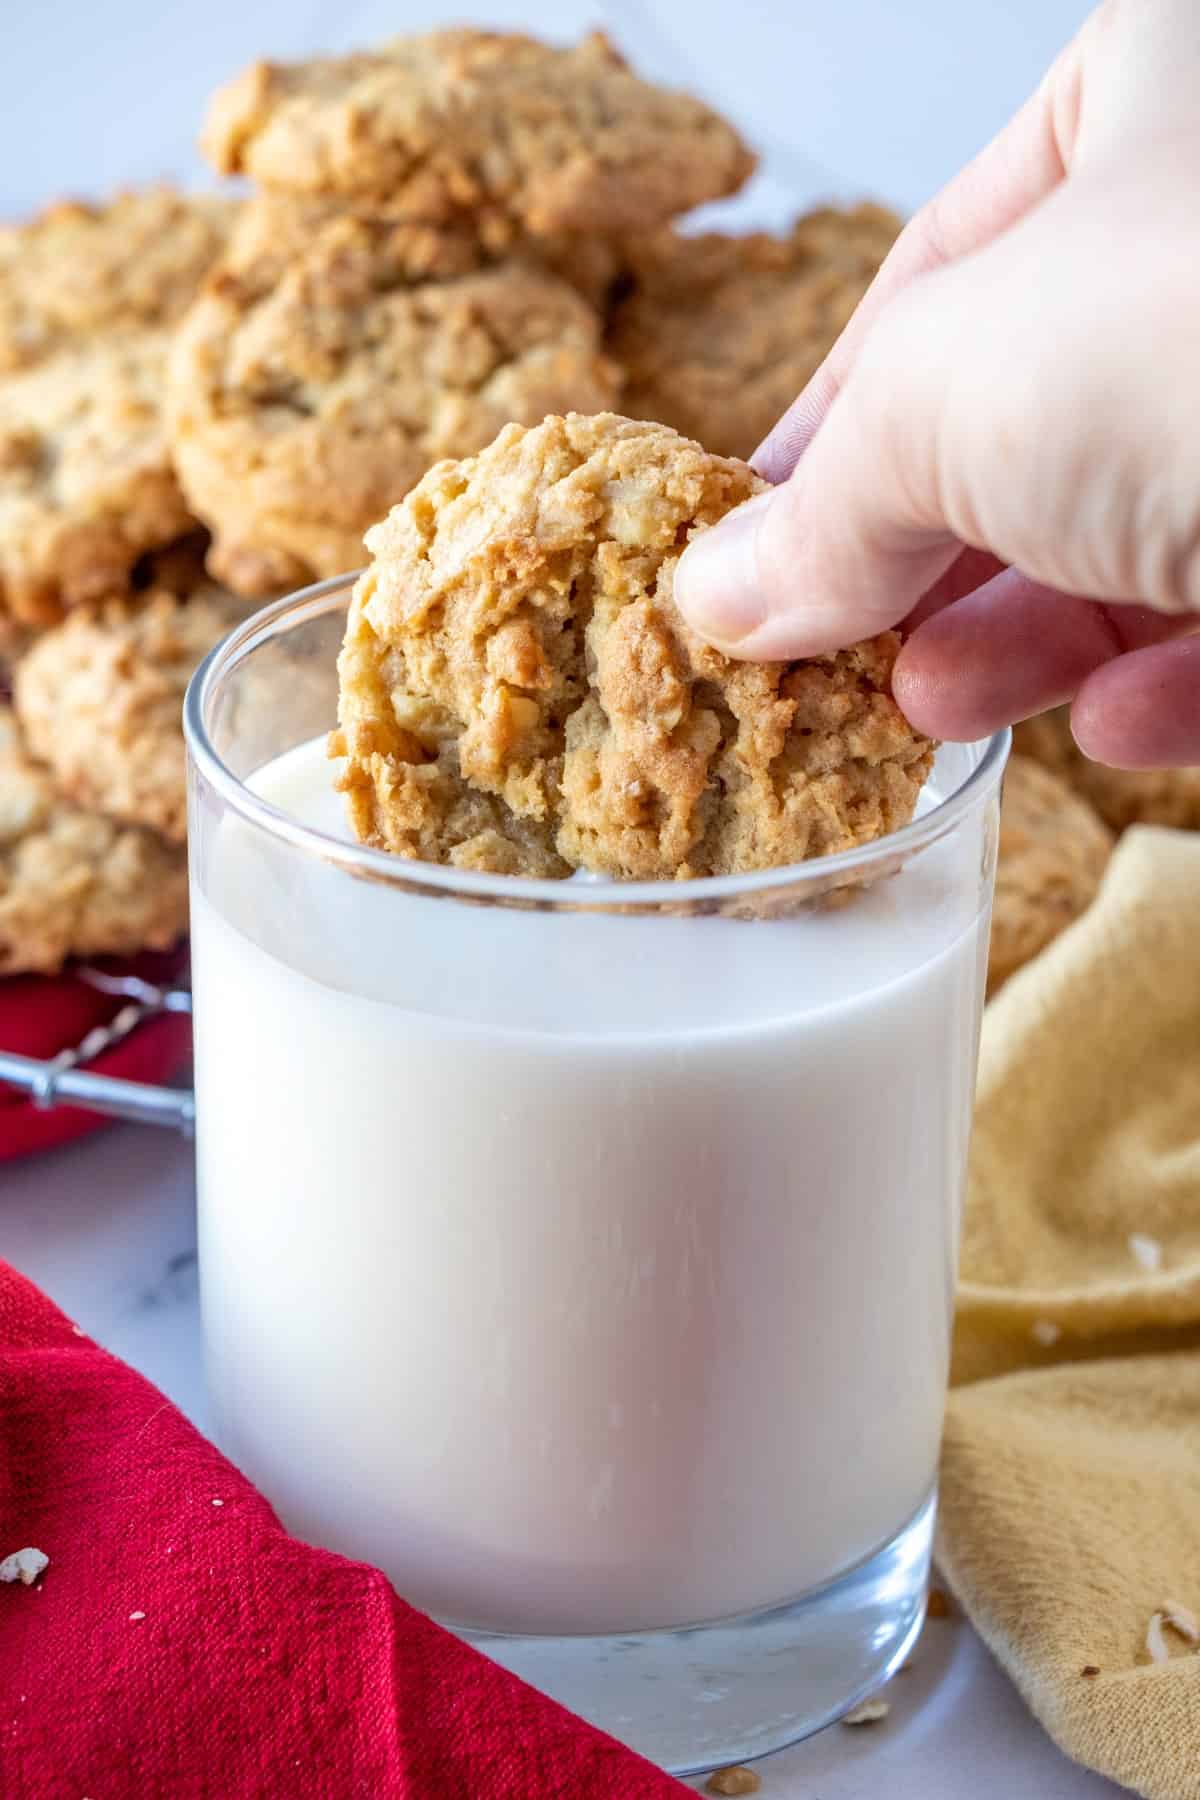 Dunking a Better Than Dad's Copycat Oatmeal Cookies in milk